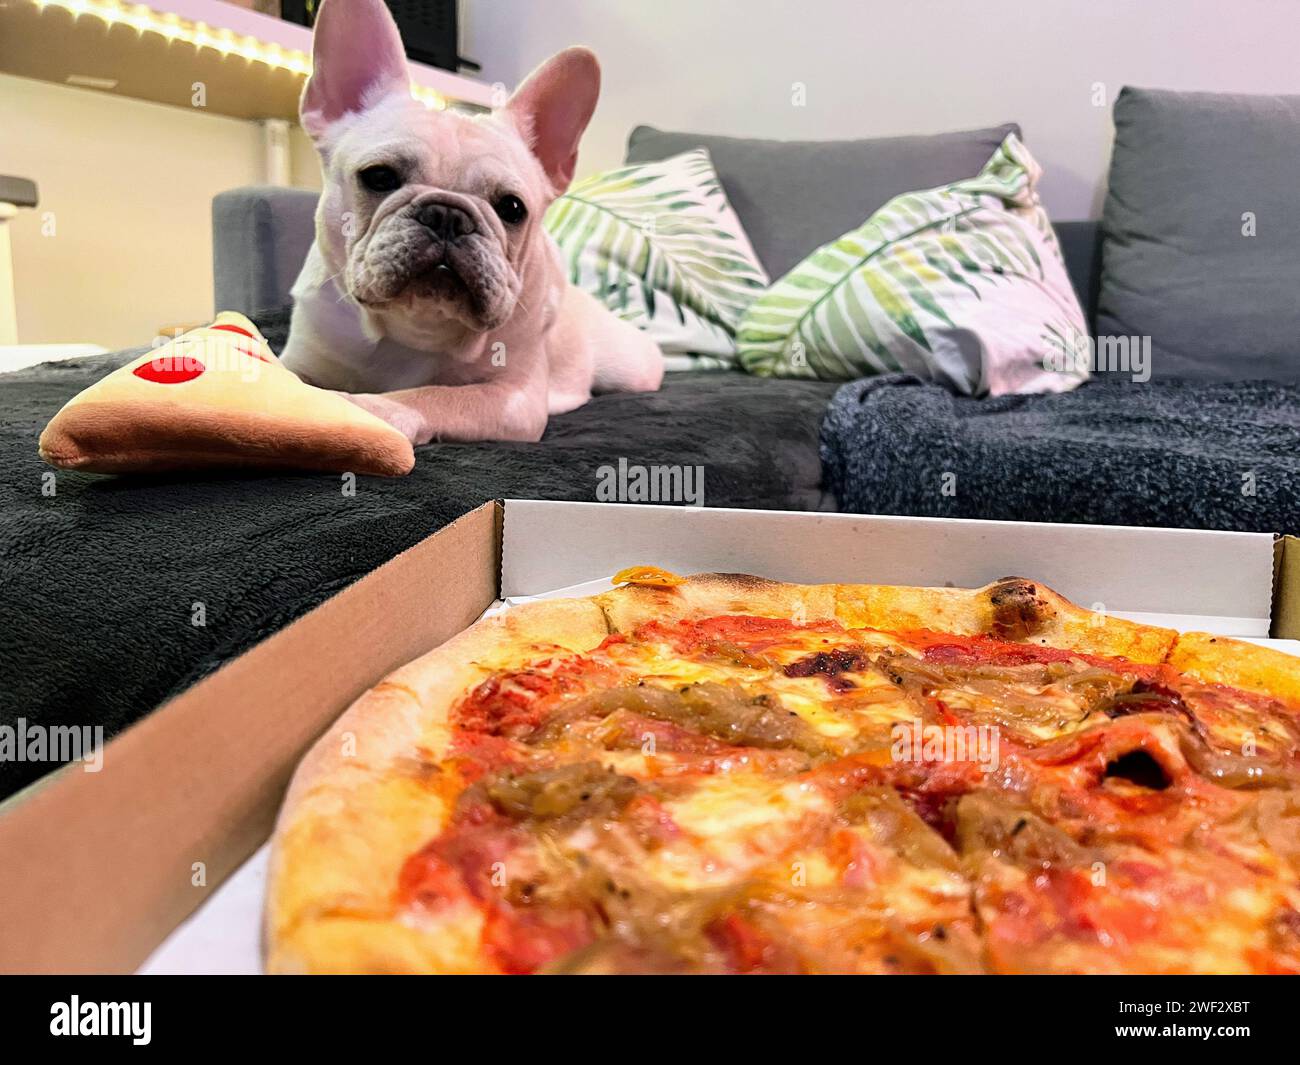 A French Bulldog lying on the sofa looking at delicious pizza Stock Photo